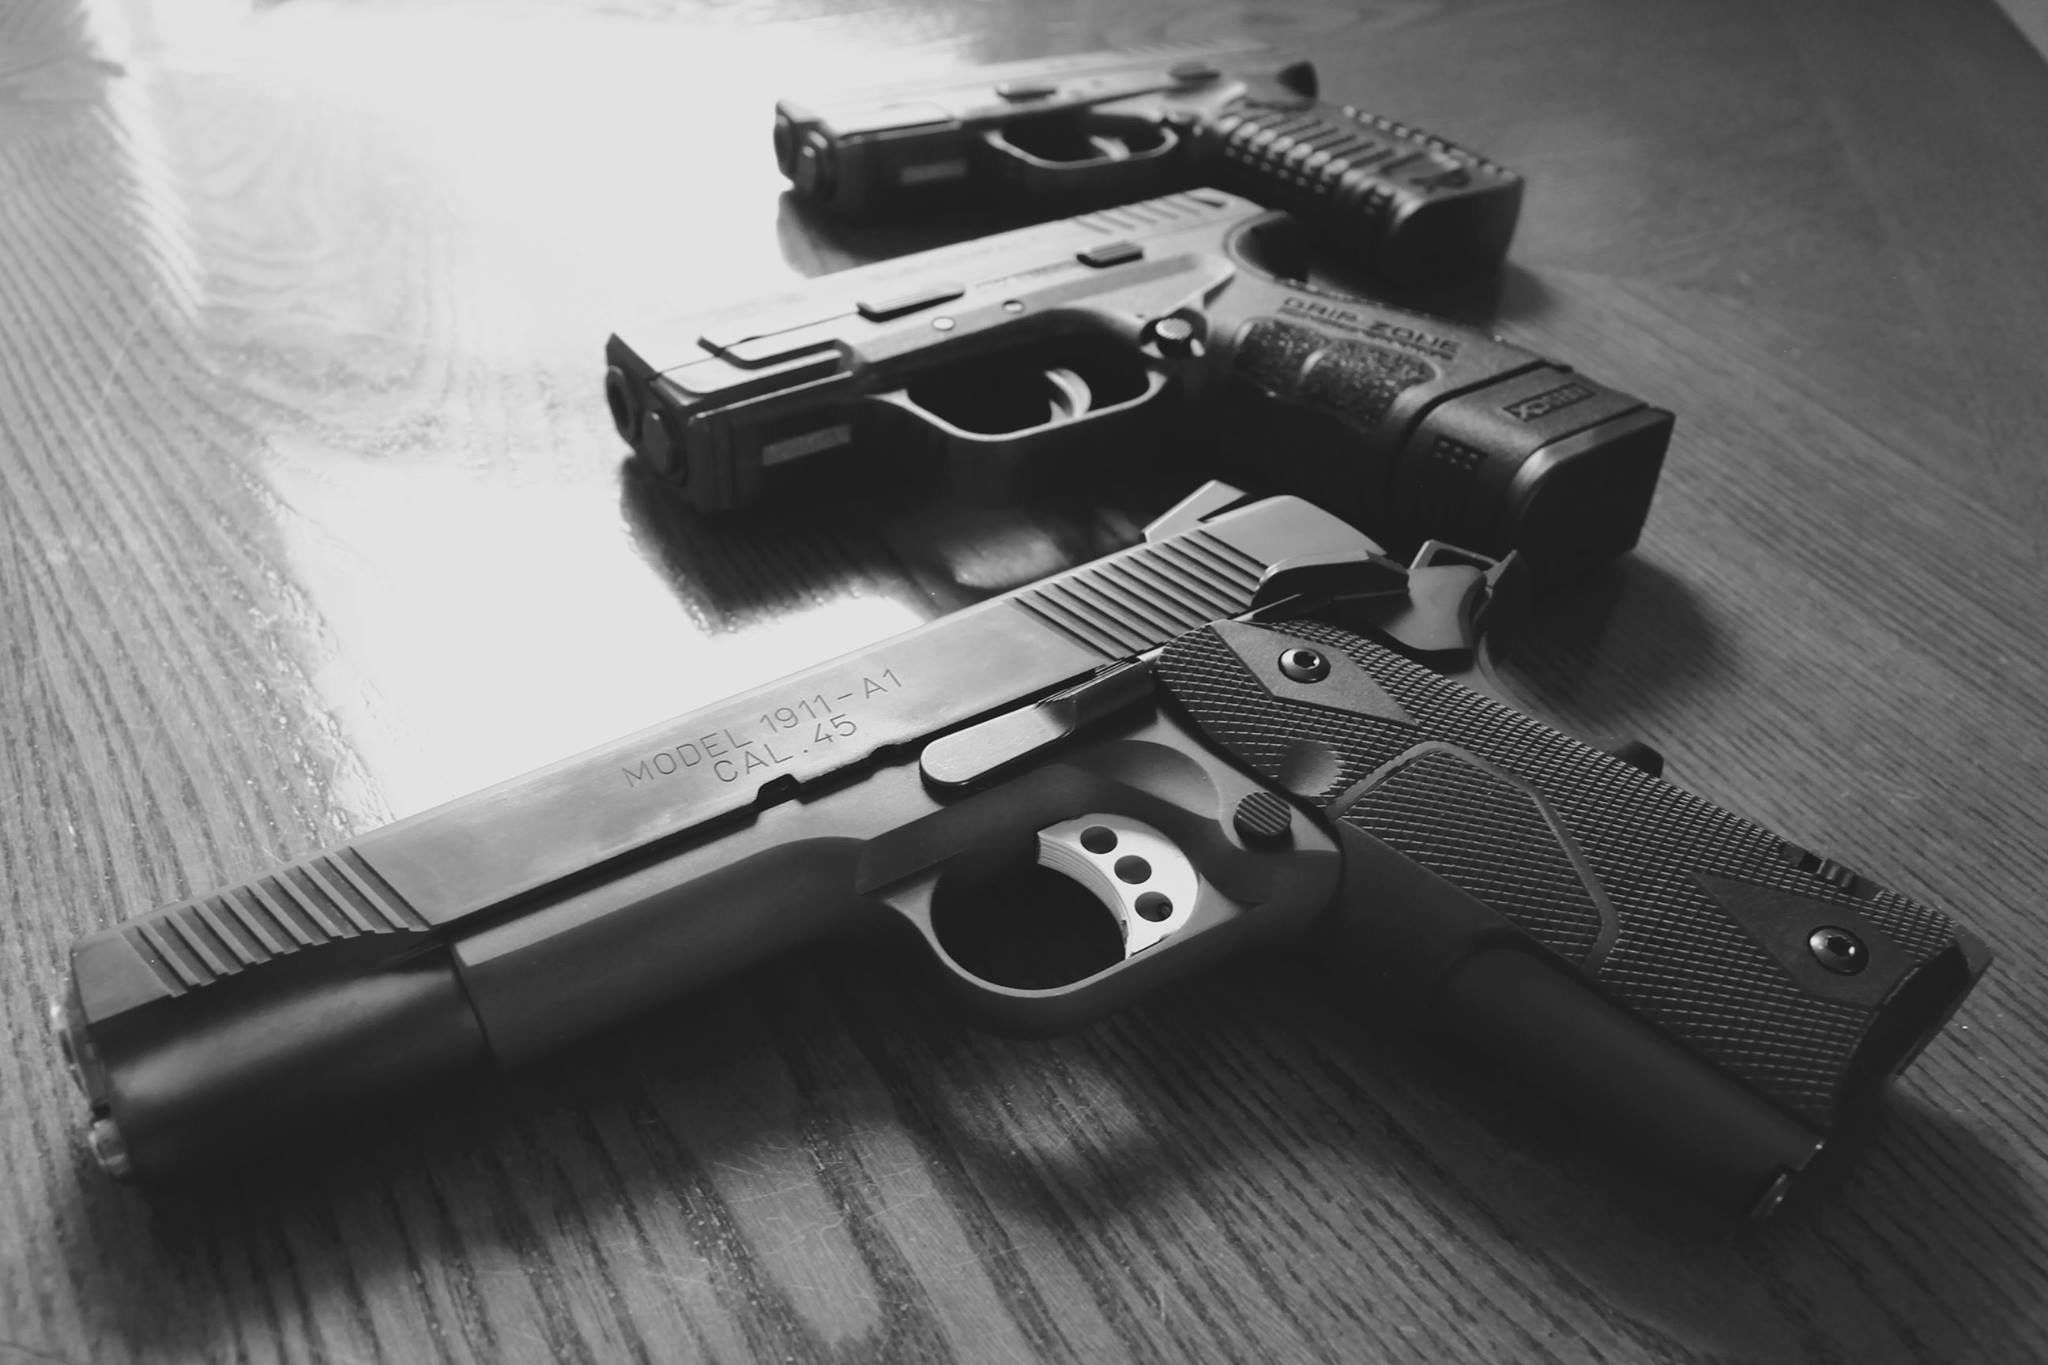 Ten Basic Gun Safety Rules for Safe Firearms Use